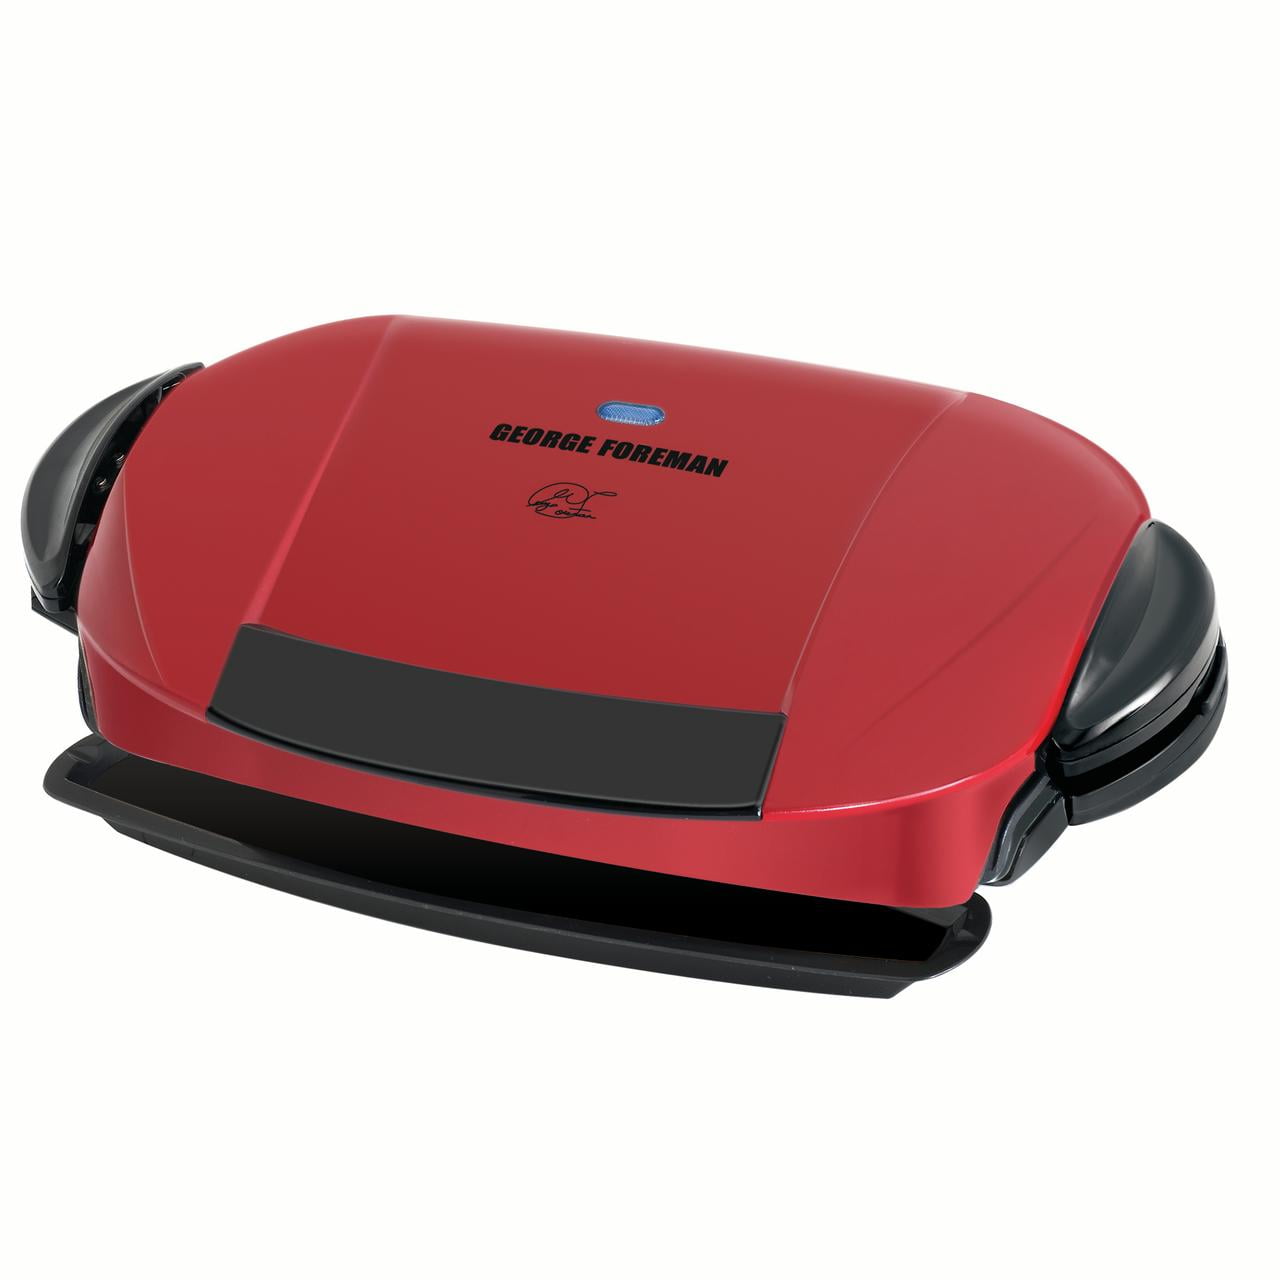 Red George Foreman 25050 7 Portion Entertaining Grill Non-Stick & Easy Clean